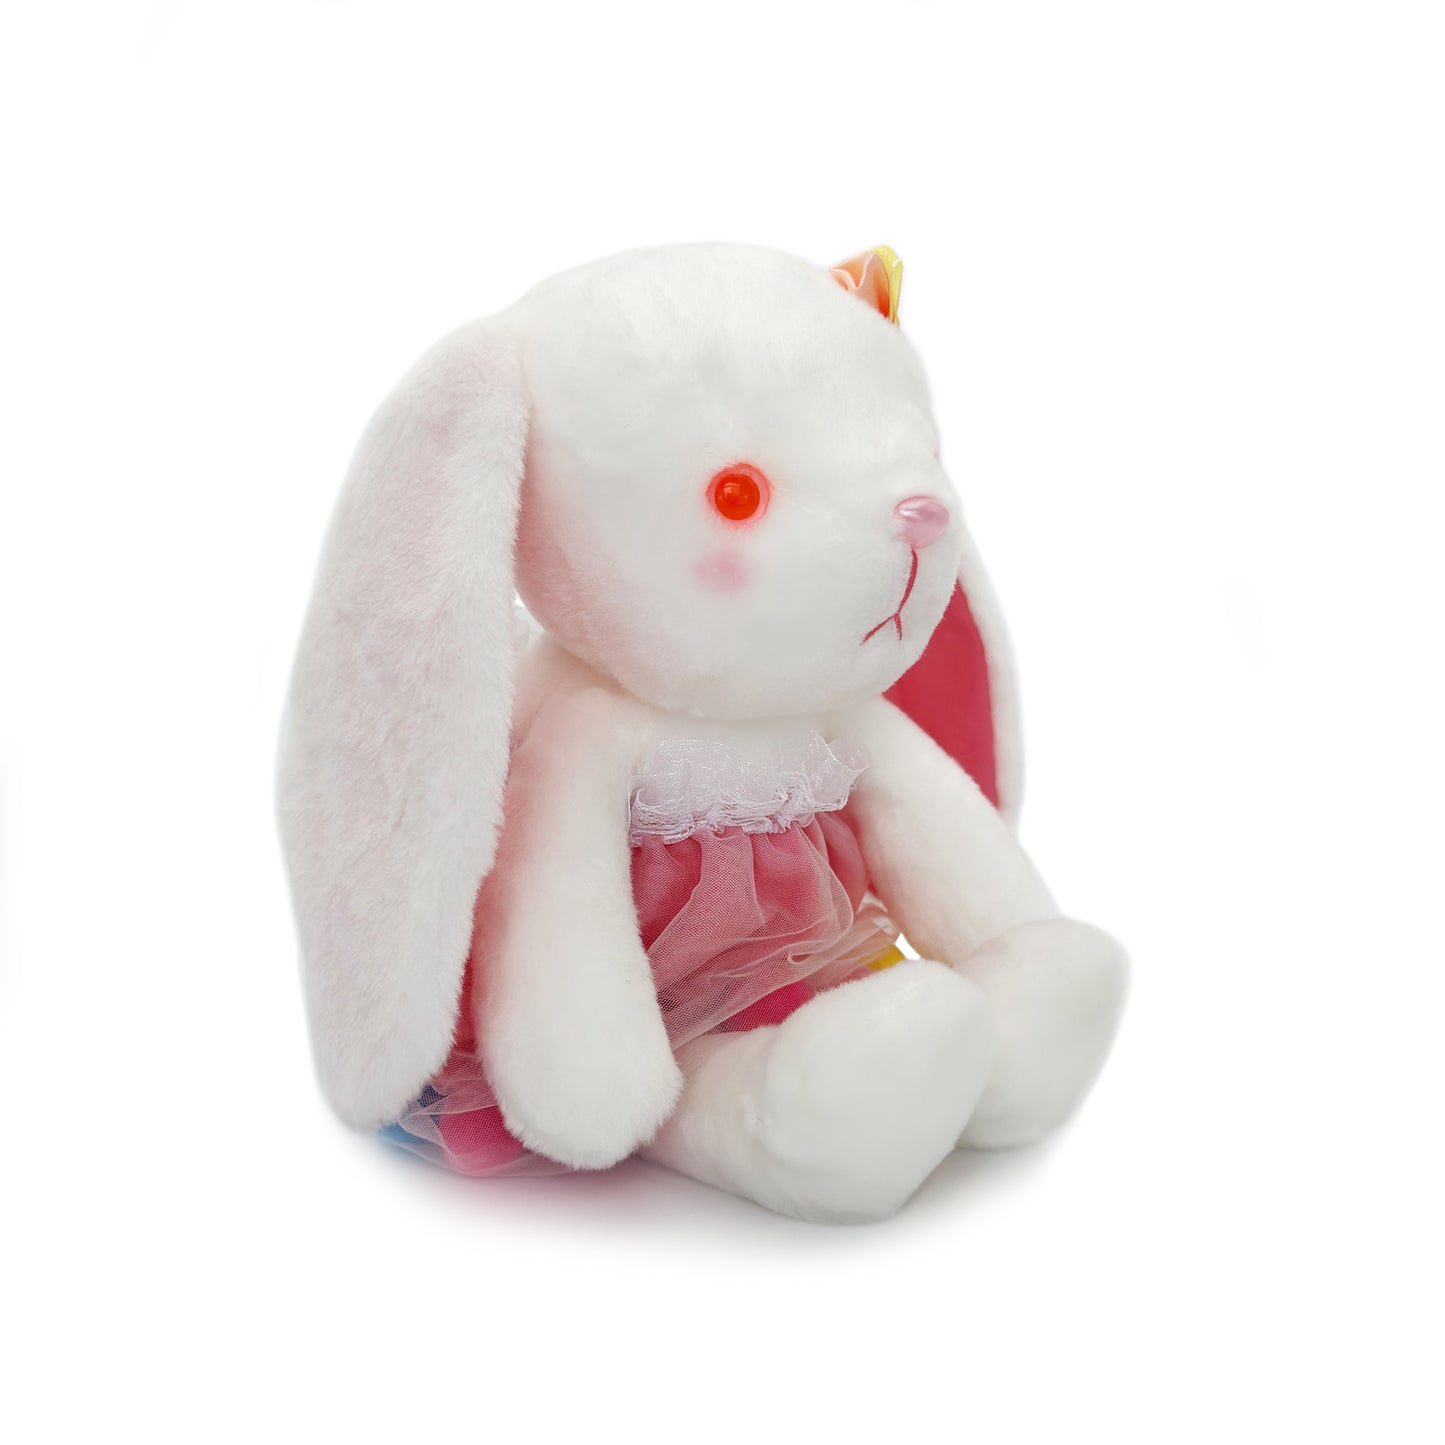 cute lovely bunny in pink dress long large ears stuffed animal PlushThis